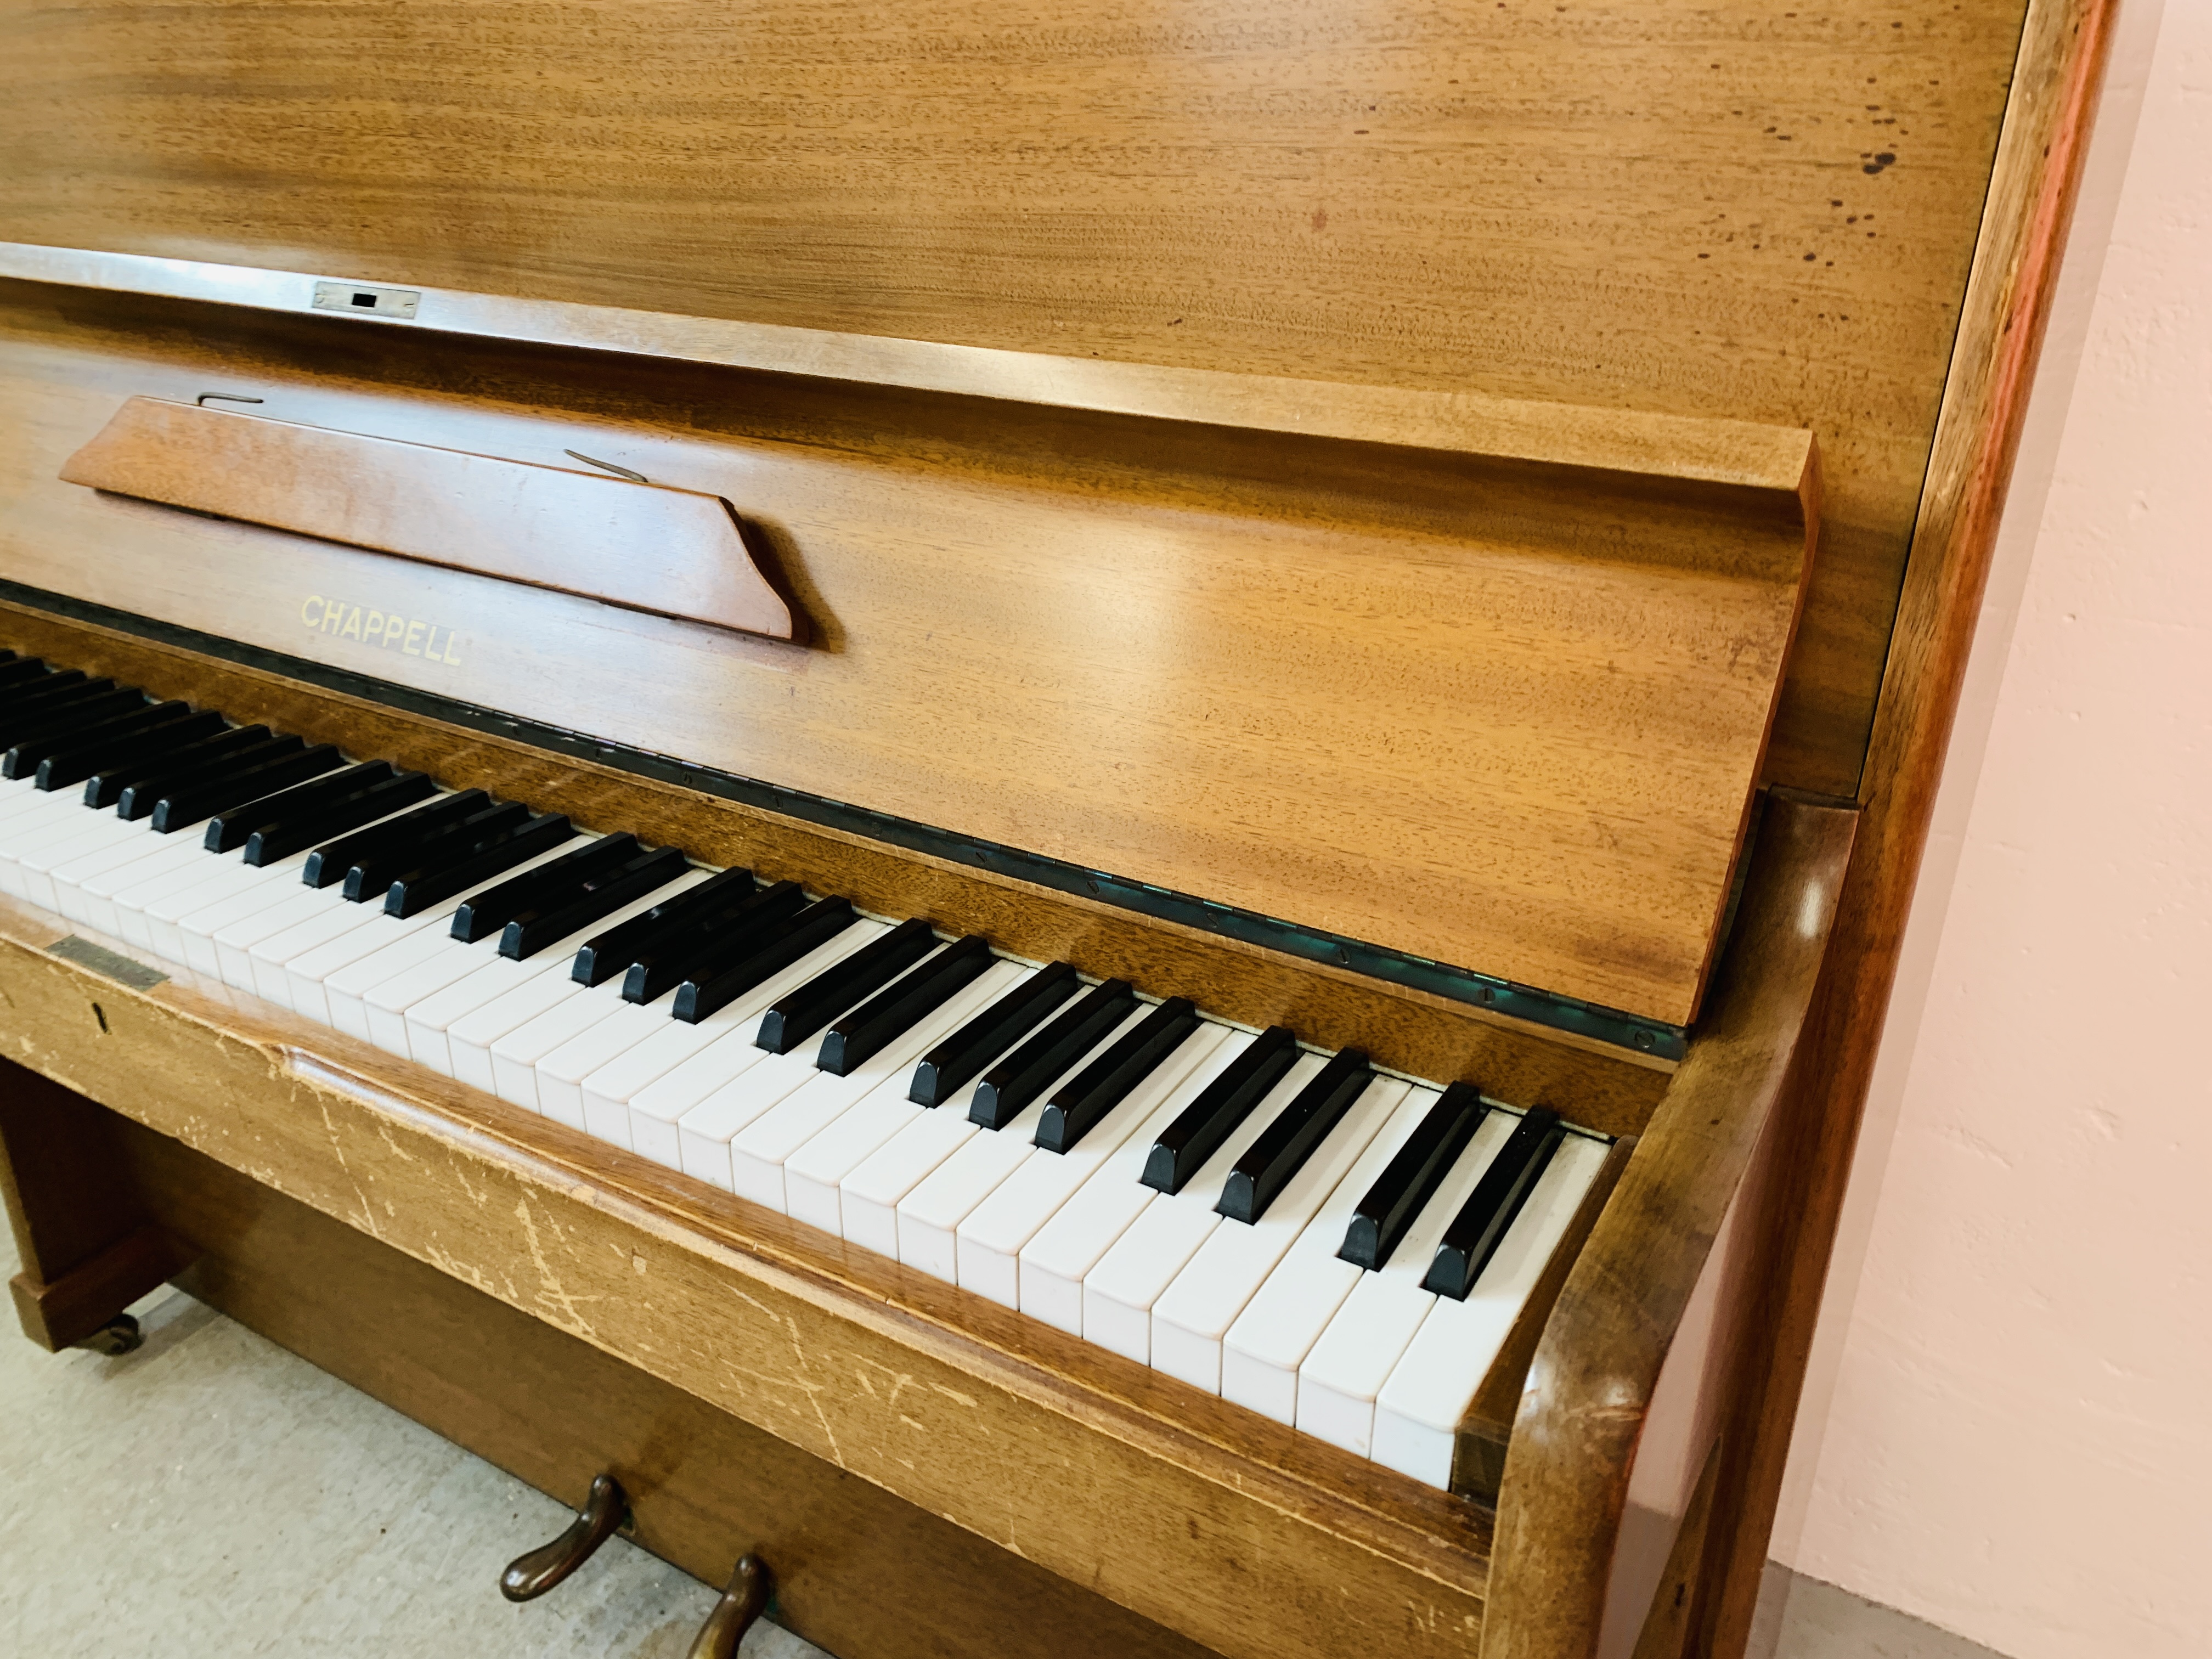 A CHAPPELL UPRIGHT OVERSTRUNG PIANO - Image 5 of 16